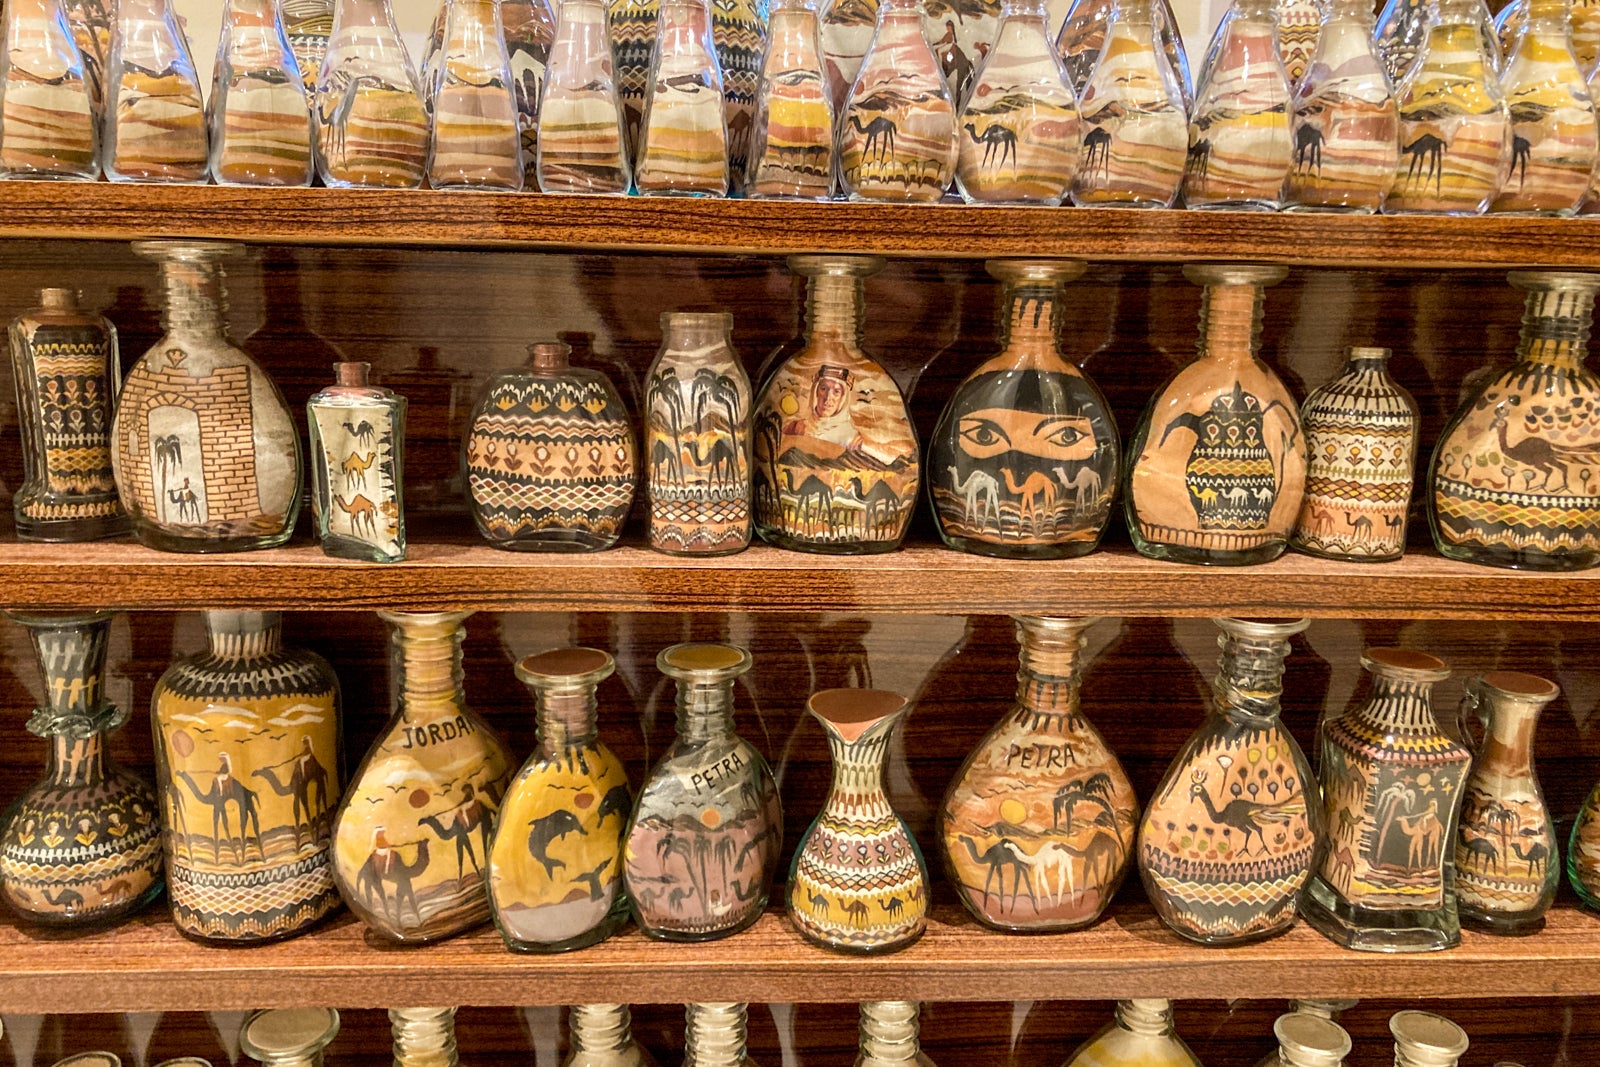 intricately decorated sand art in glass bottles